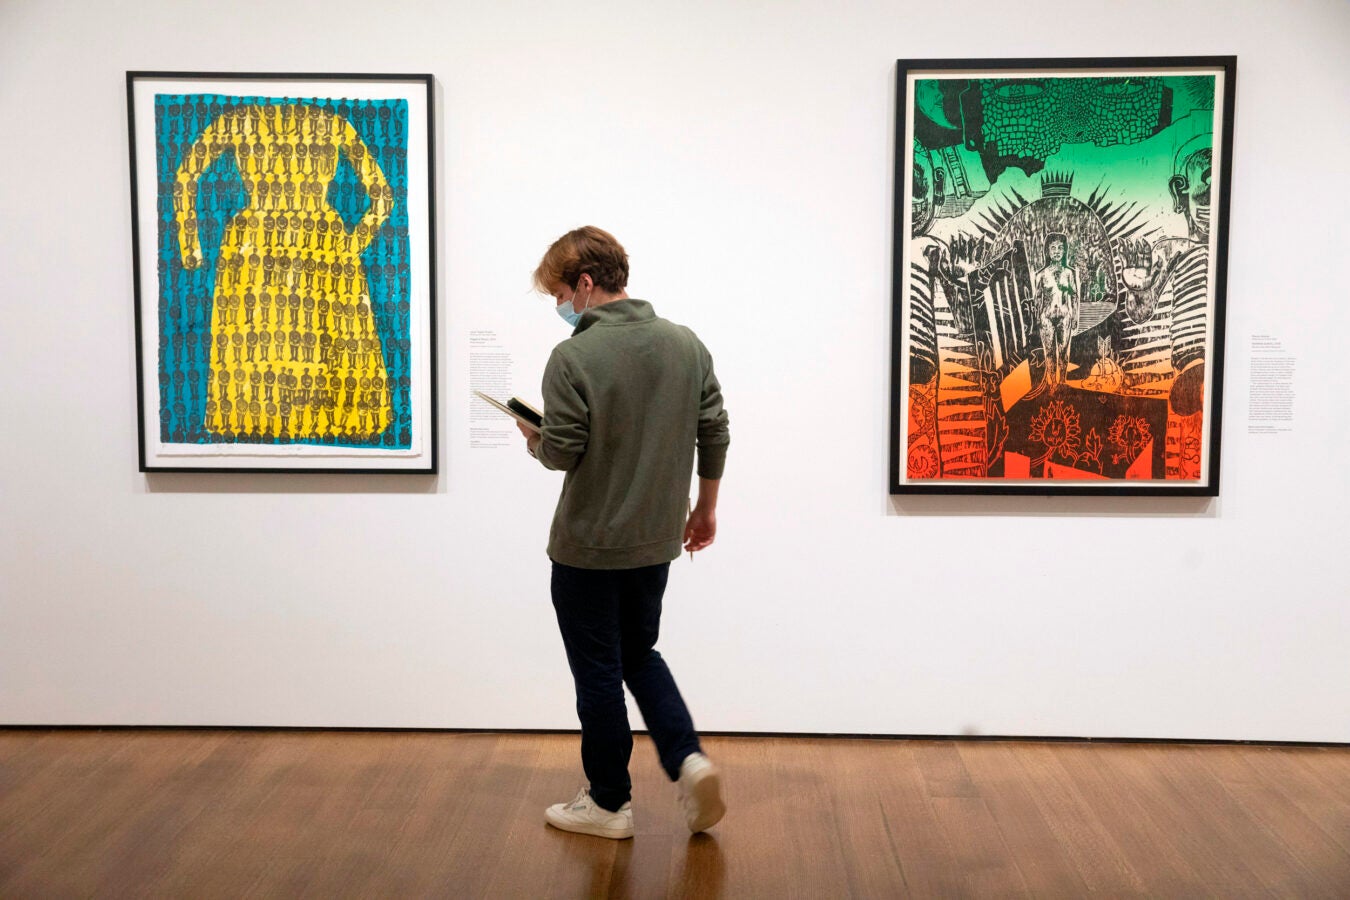 A student studies Hagar’s Dress, 2007 (left) by Janet Taylor Pickett and Untitled (color), 2006 (right) by Danny Alvarez.